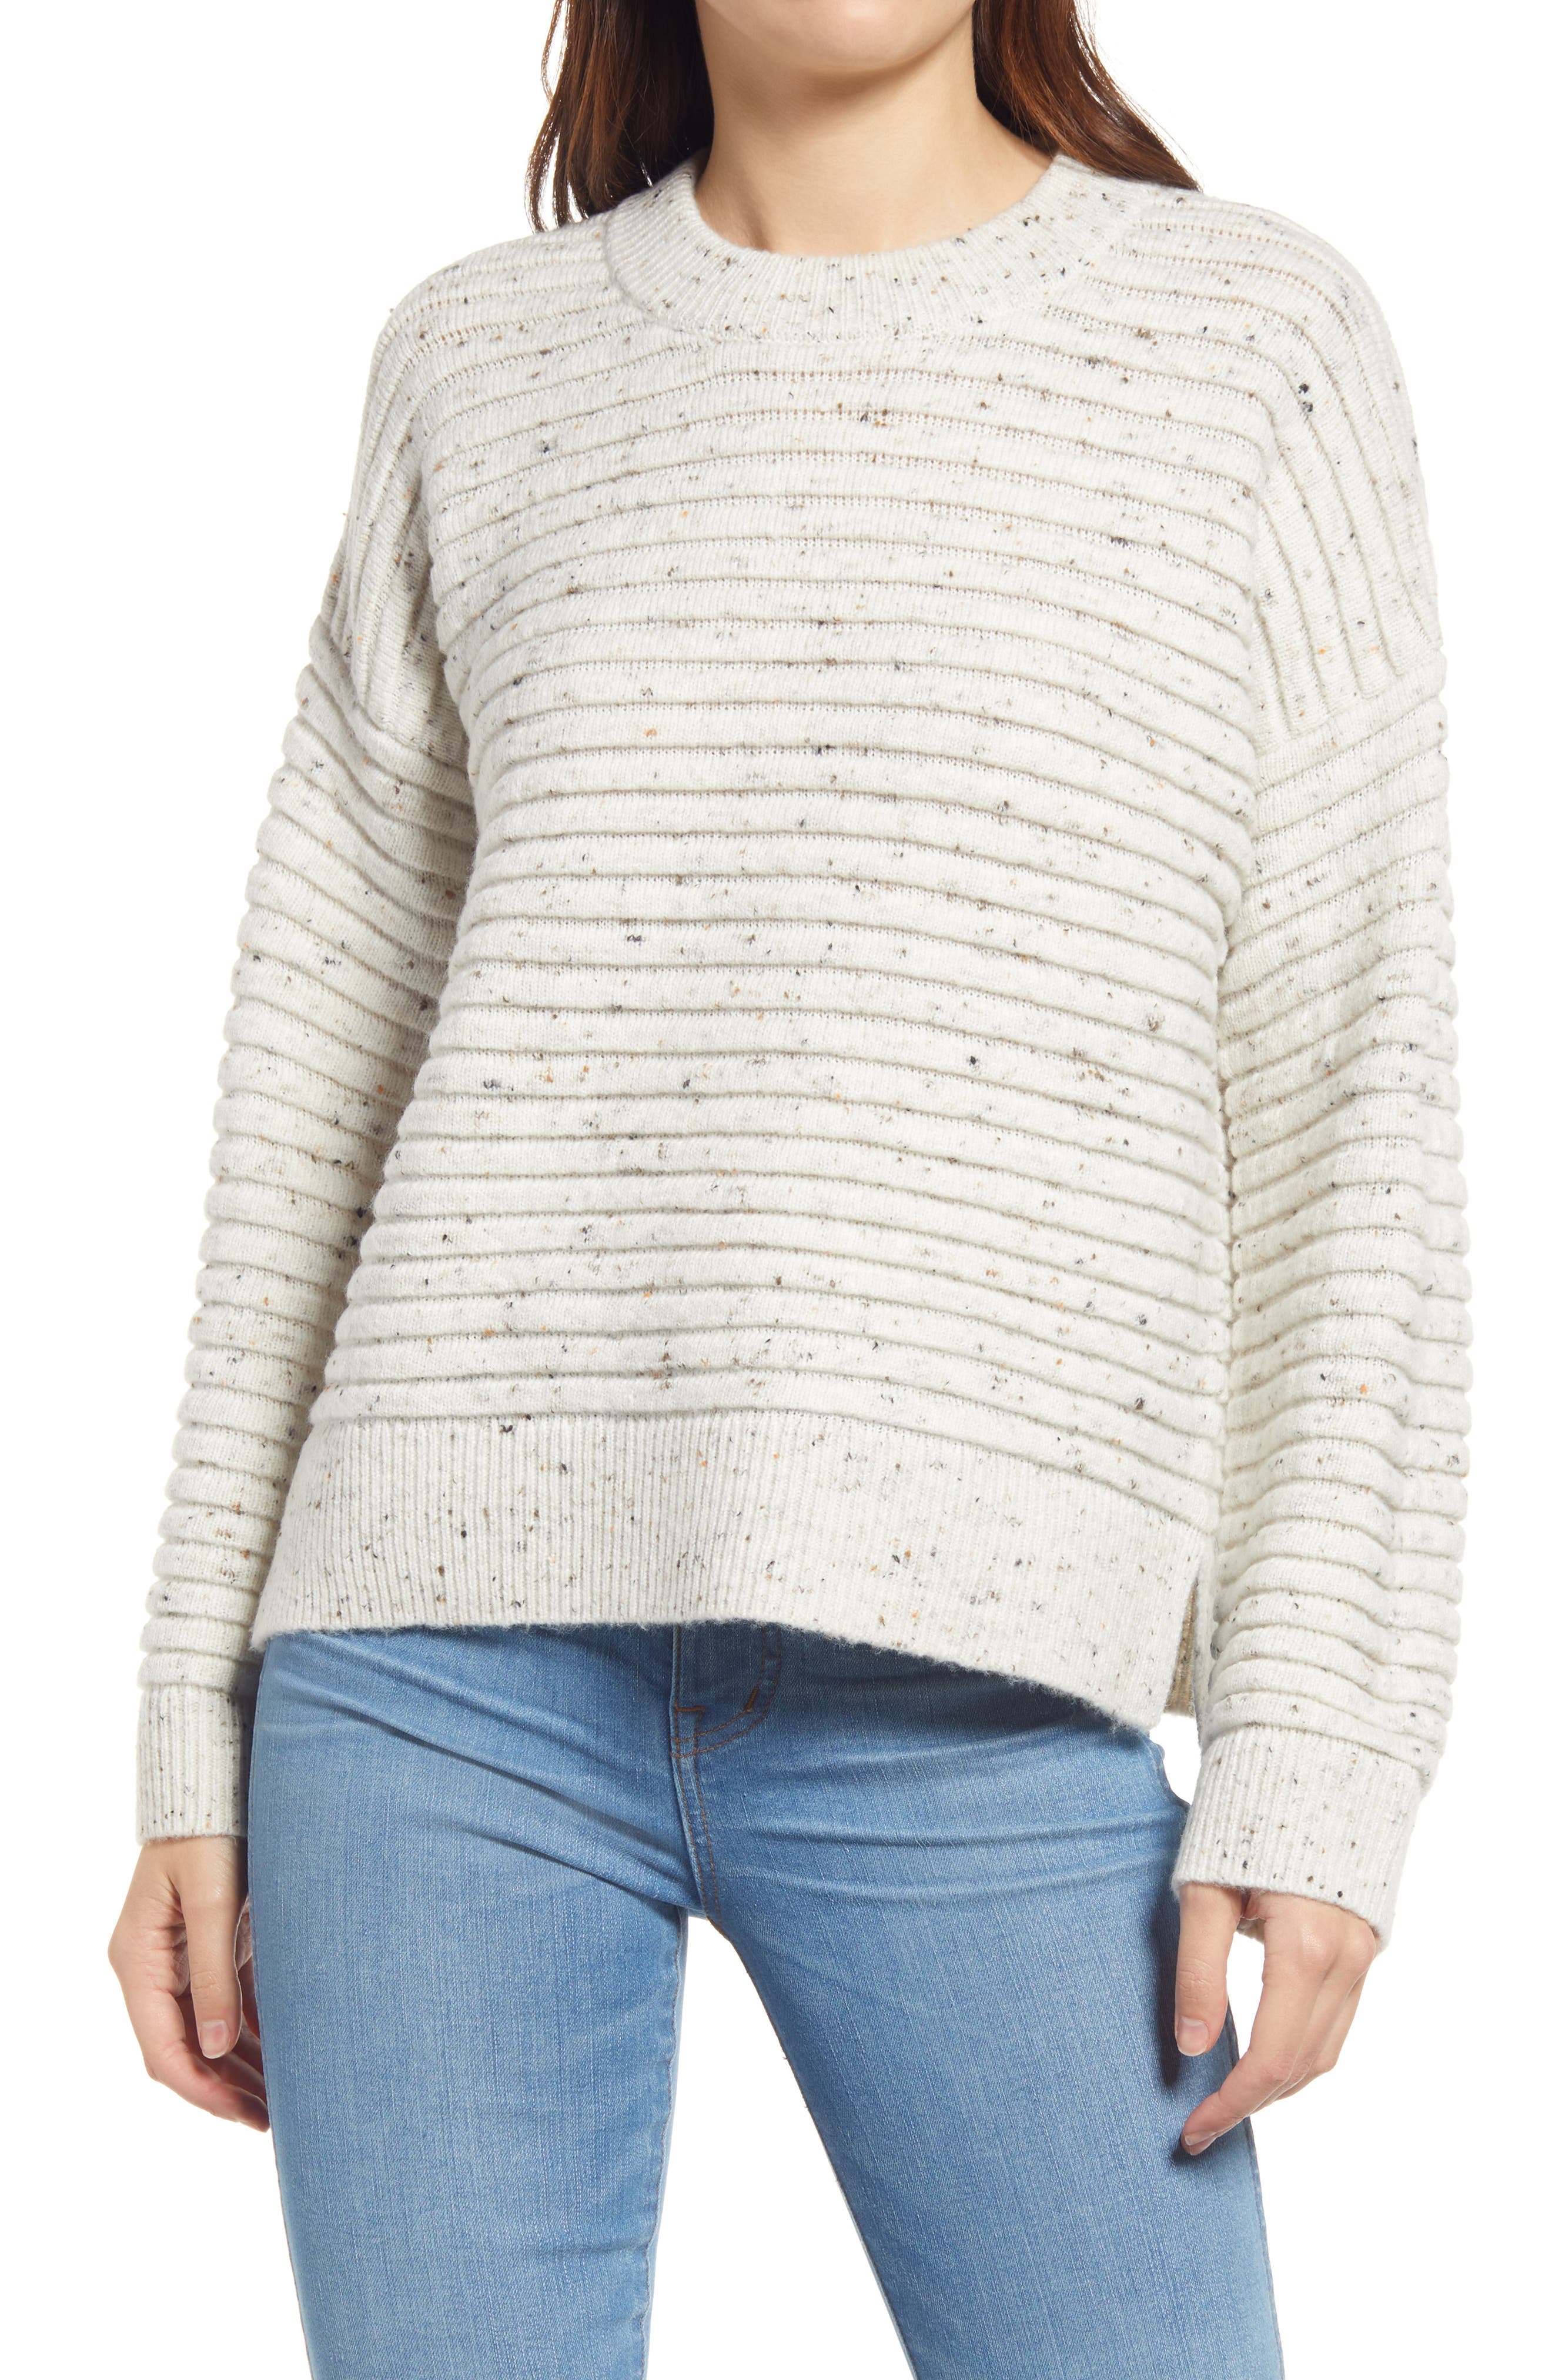 Madewell Donegal Elsmere Pullover ...